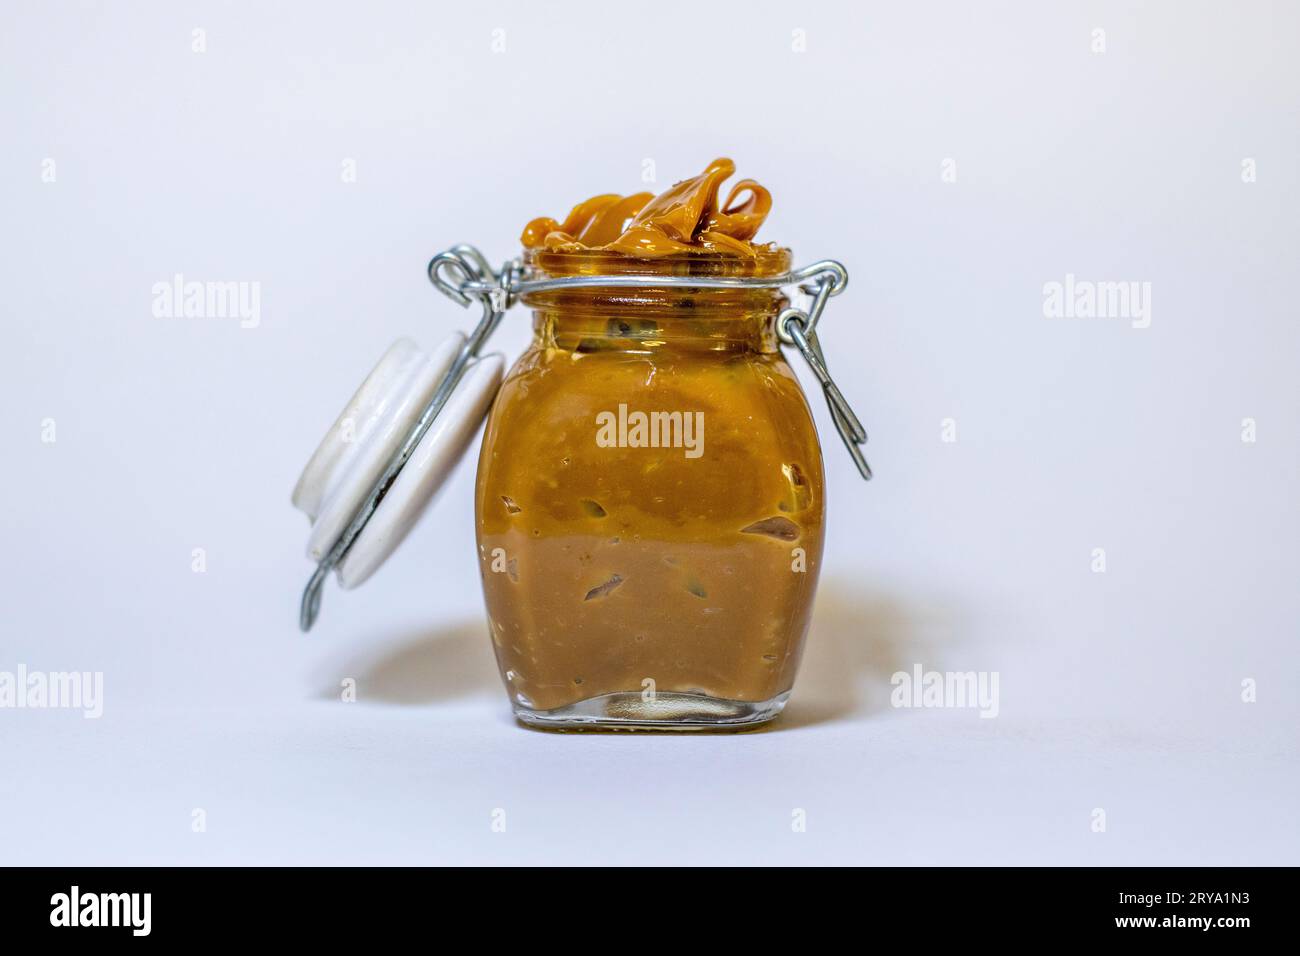 Uncovered jar of dulce de leche overflowing. Stock Photo